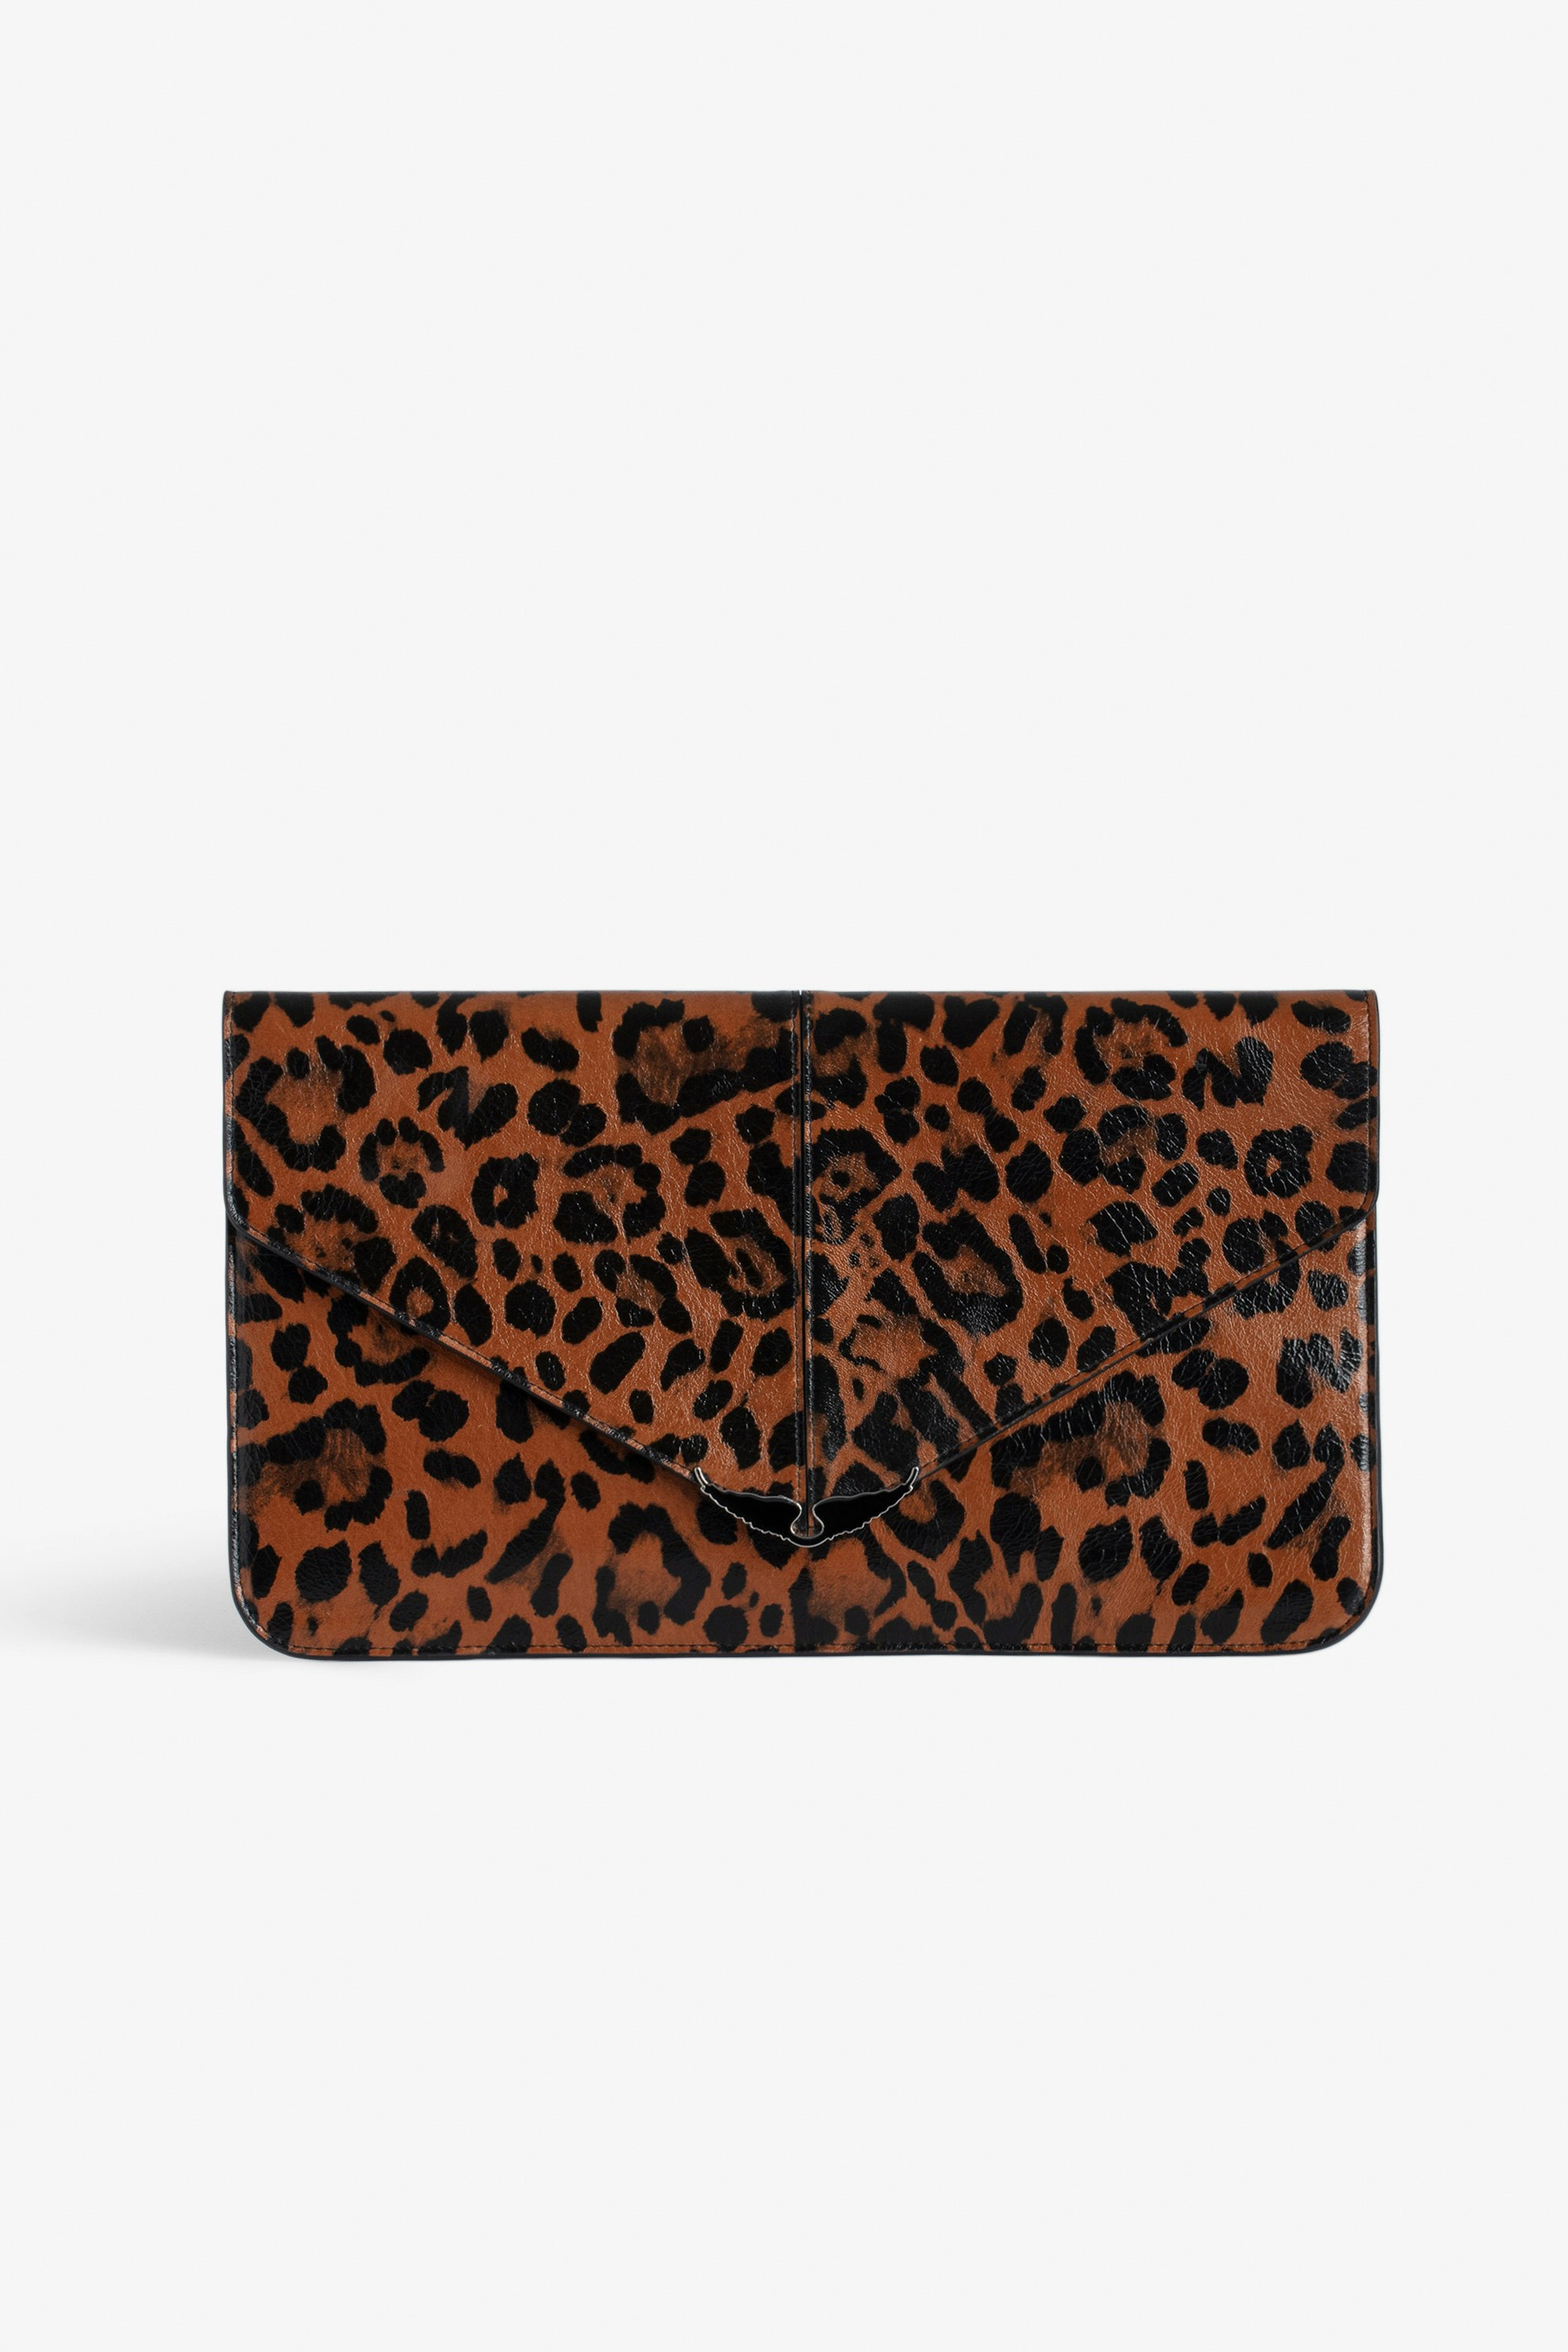 Borderline Leopard Clutch Women’s brown leopard-print patent leather envelope clutch with wings charm.